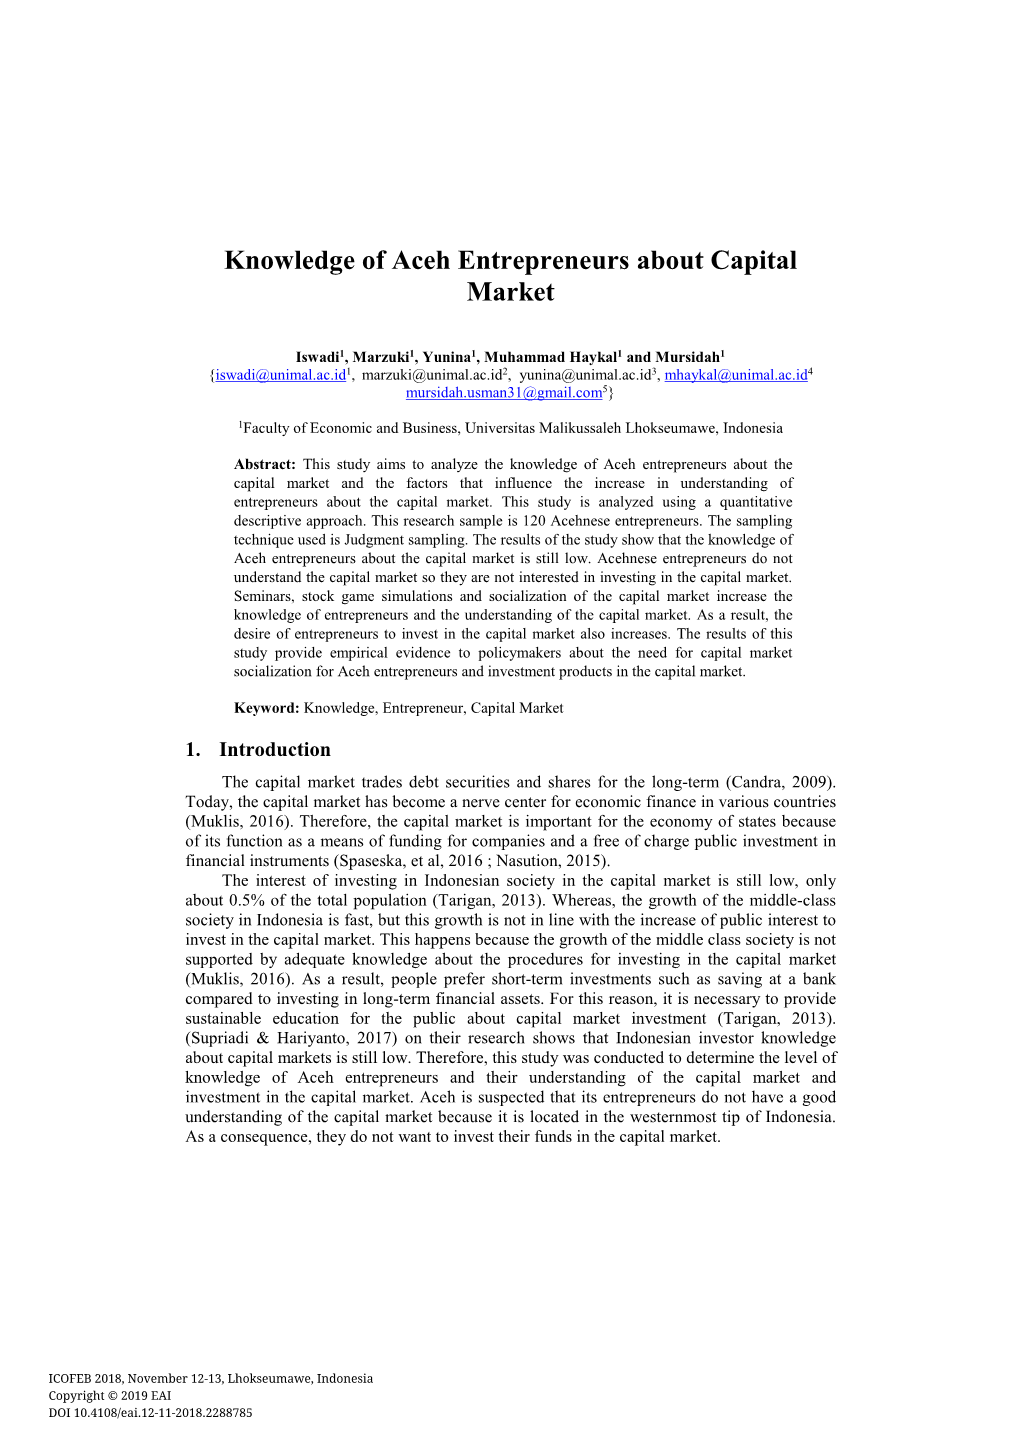 Knowledge of Aceh Entrepreneurs About Capital Market